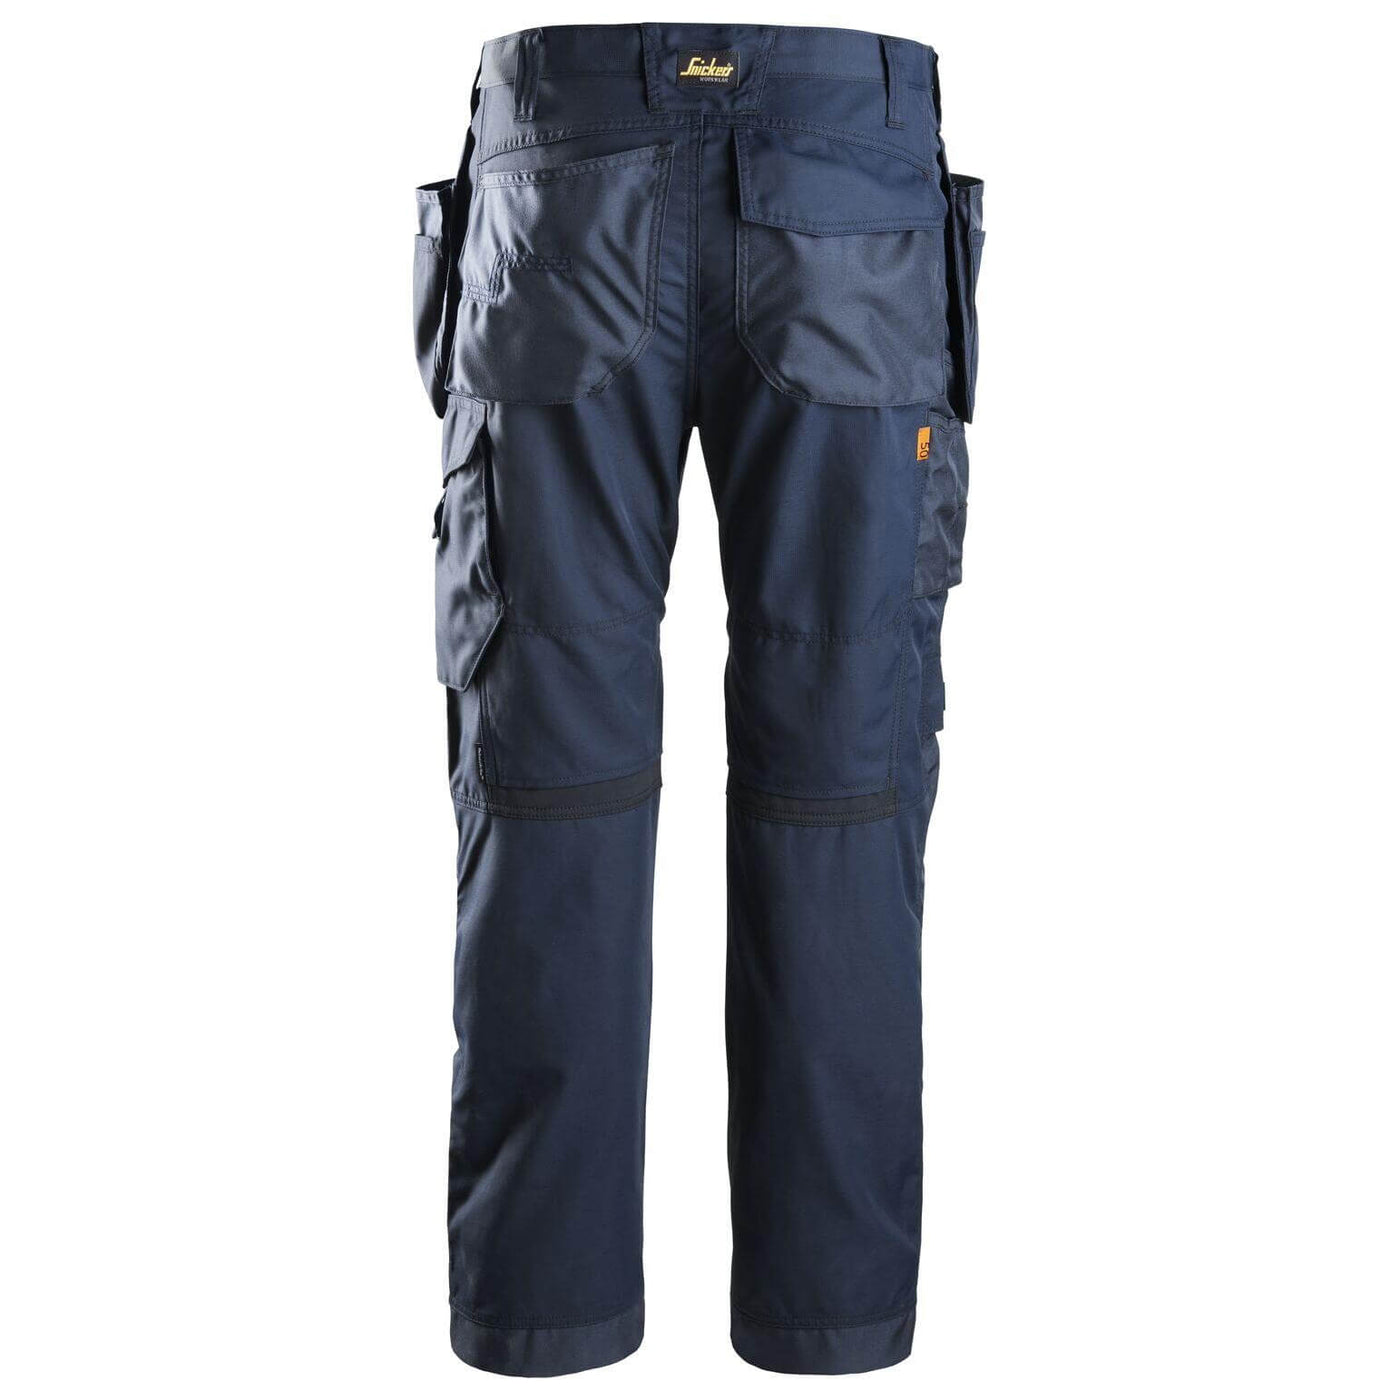 Snickers 6201 AllroundWork Work Trousers Holster Pockets Navy Navy back #colour_navy-navy